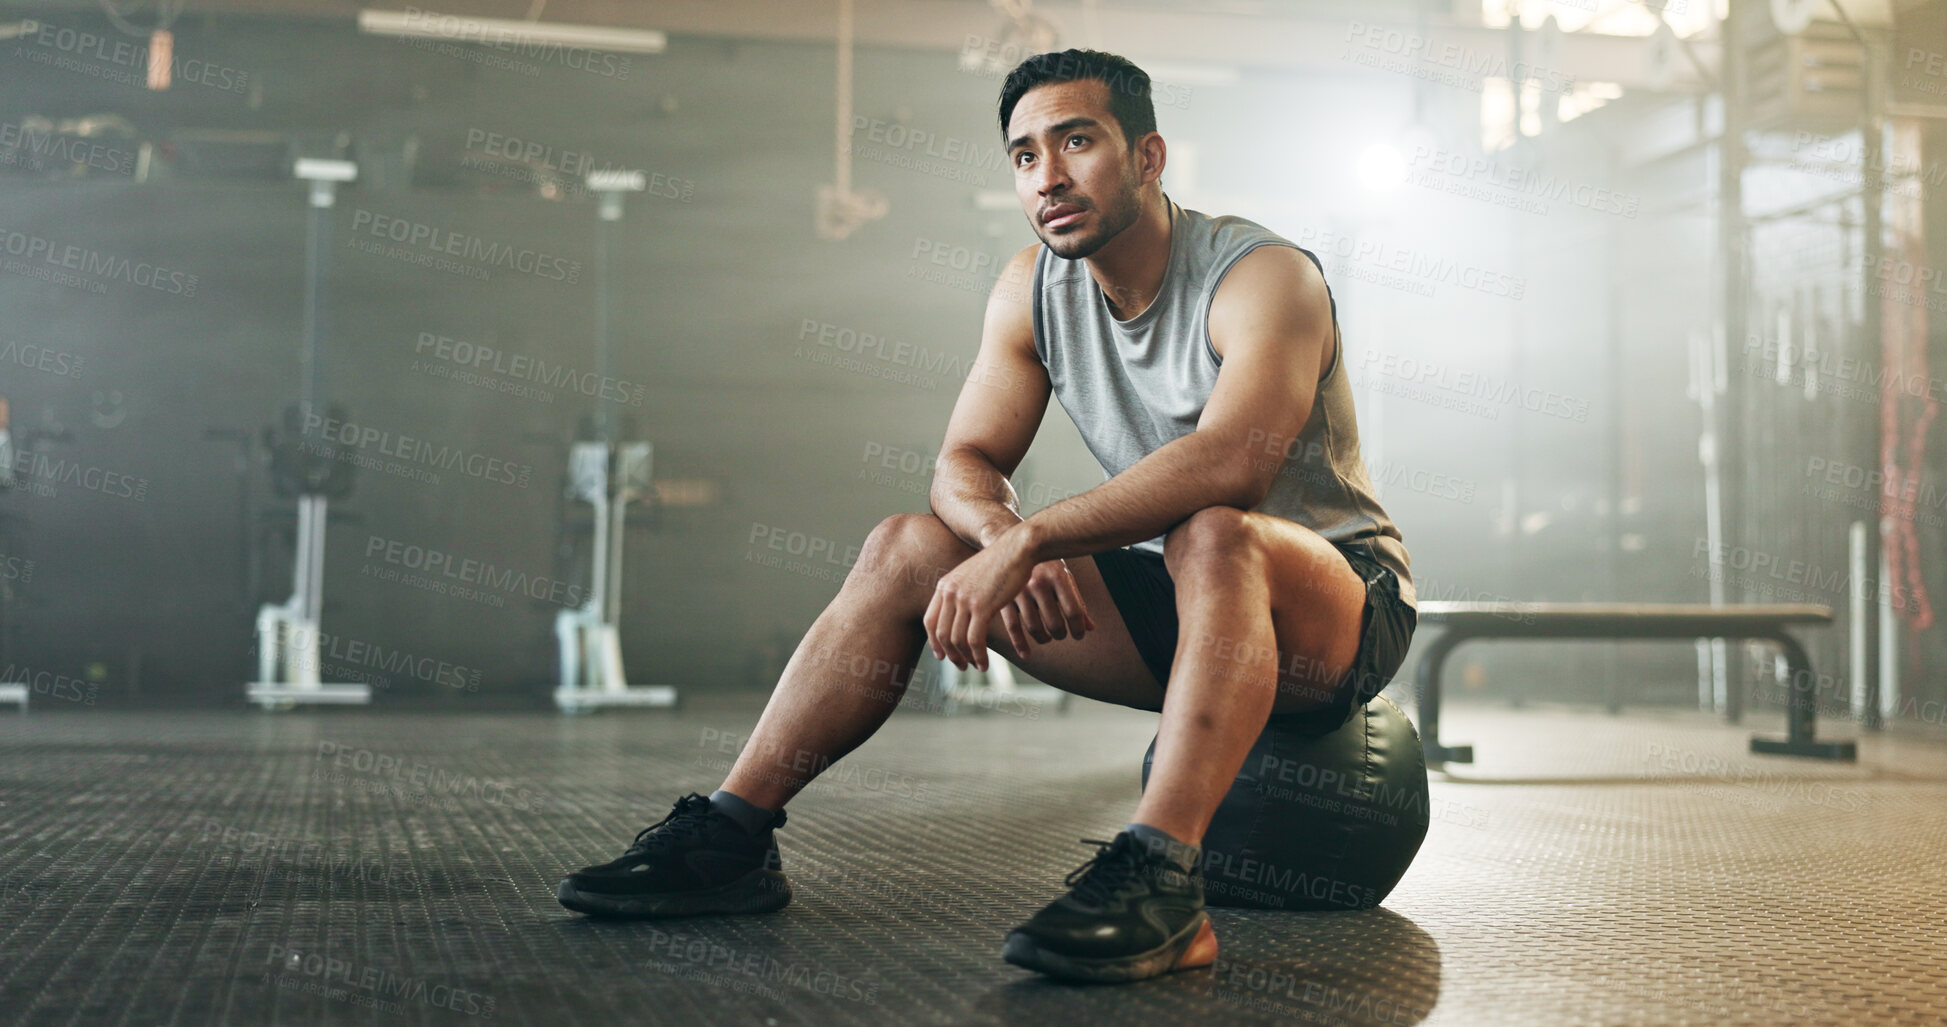 Buy stock photo Fitness, breathing and sweating with a tired man in the gym, resting after an intense workout. Exercise, health and fatigue with a young athlete in recovery from training for sports or wellness